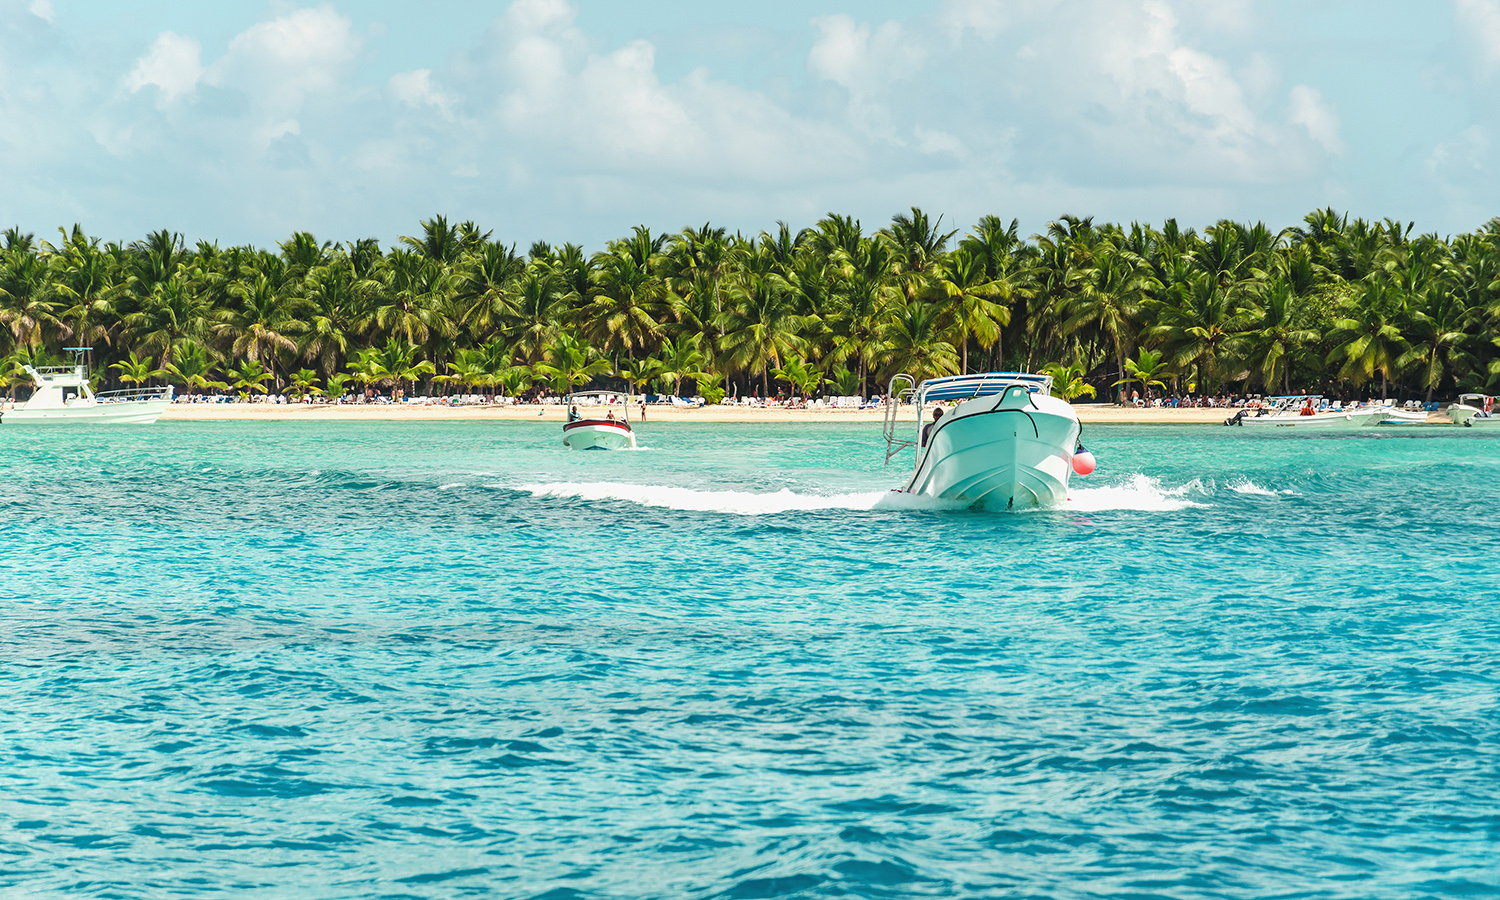 Within a day's boatride one can explore the best beaches in Belize!